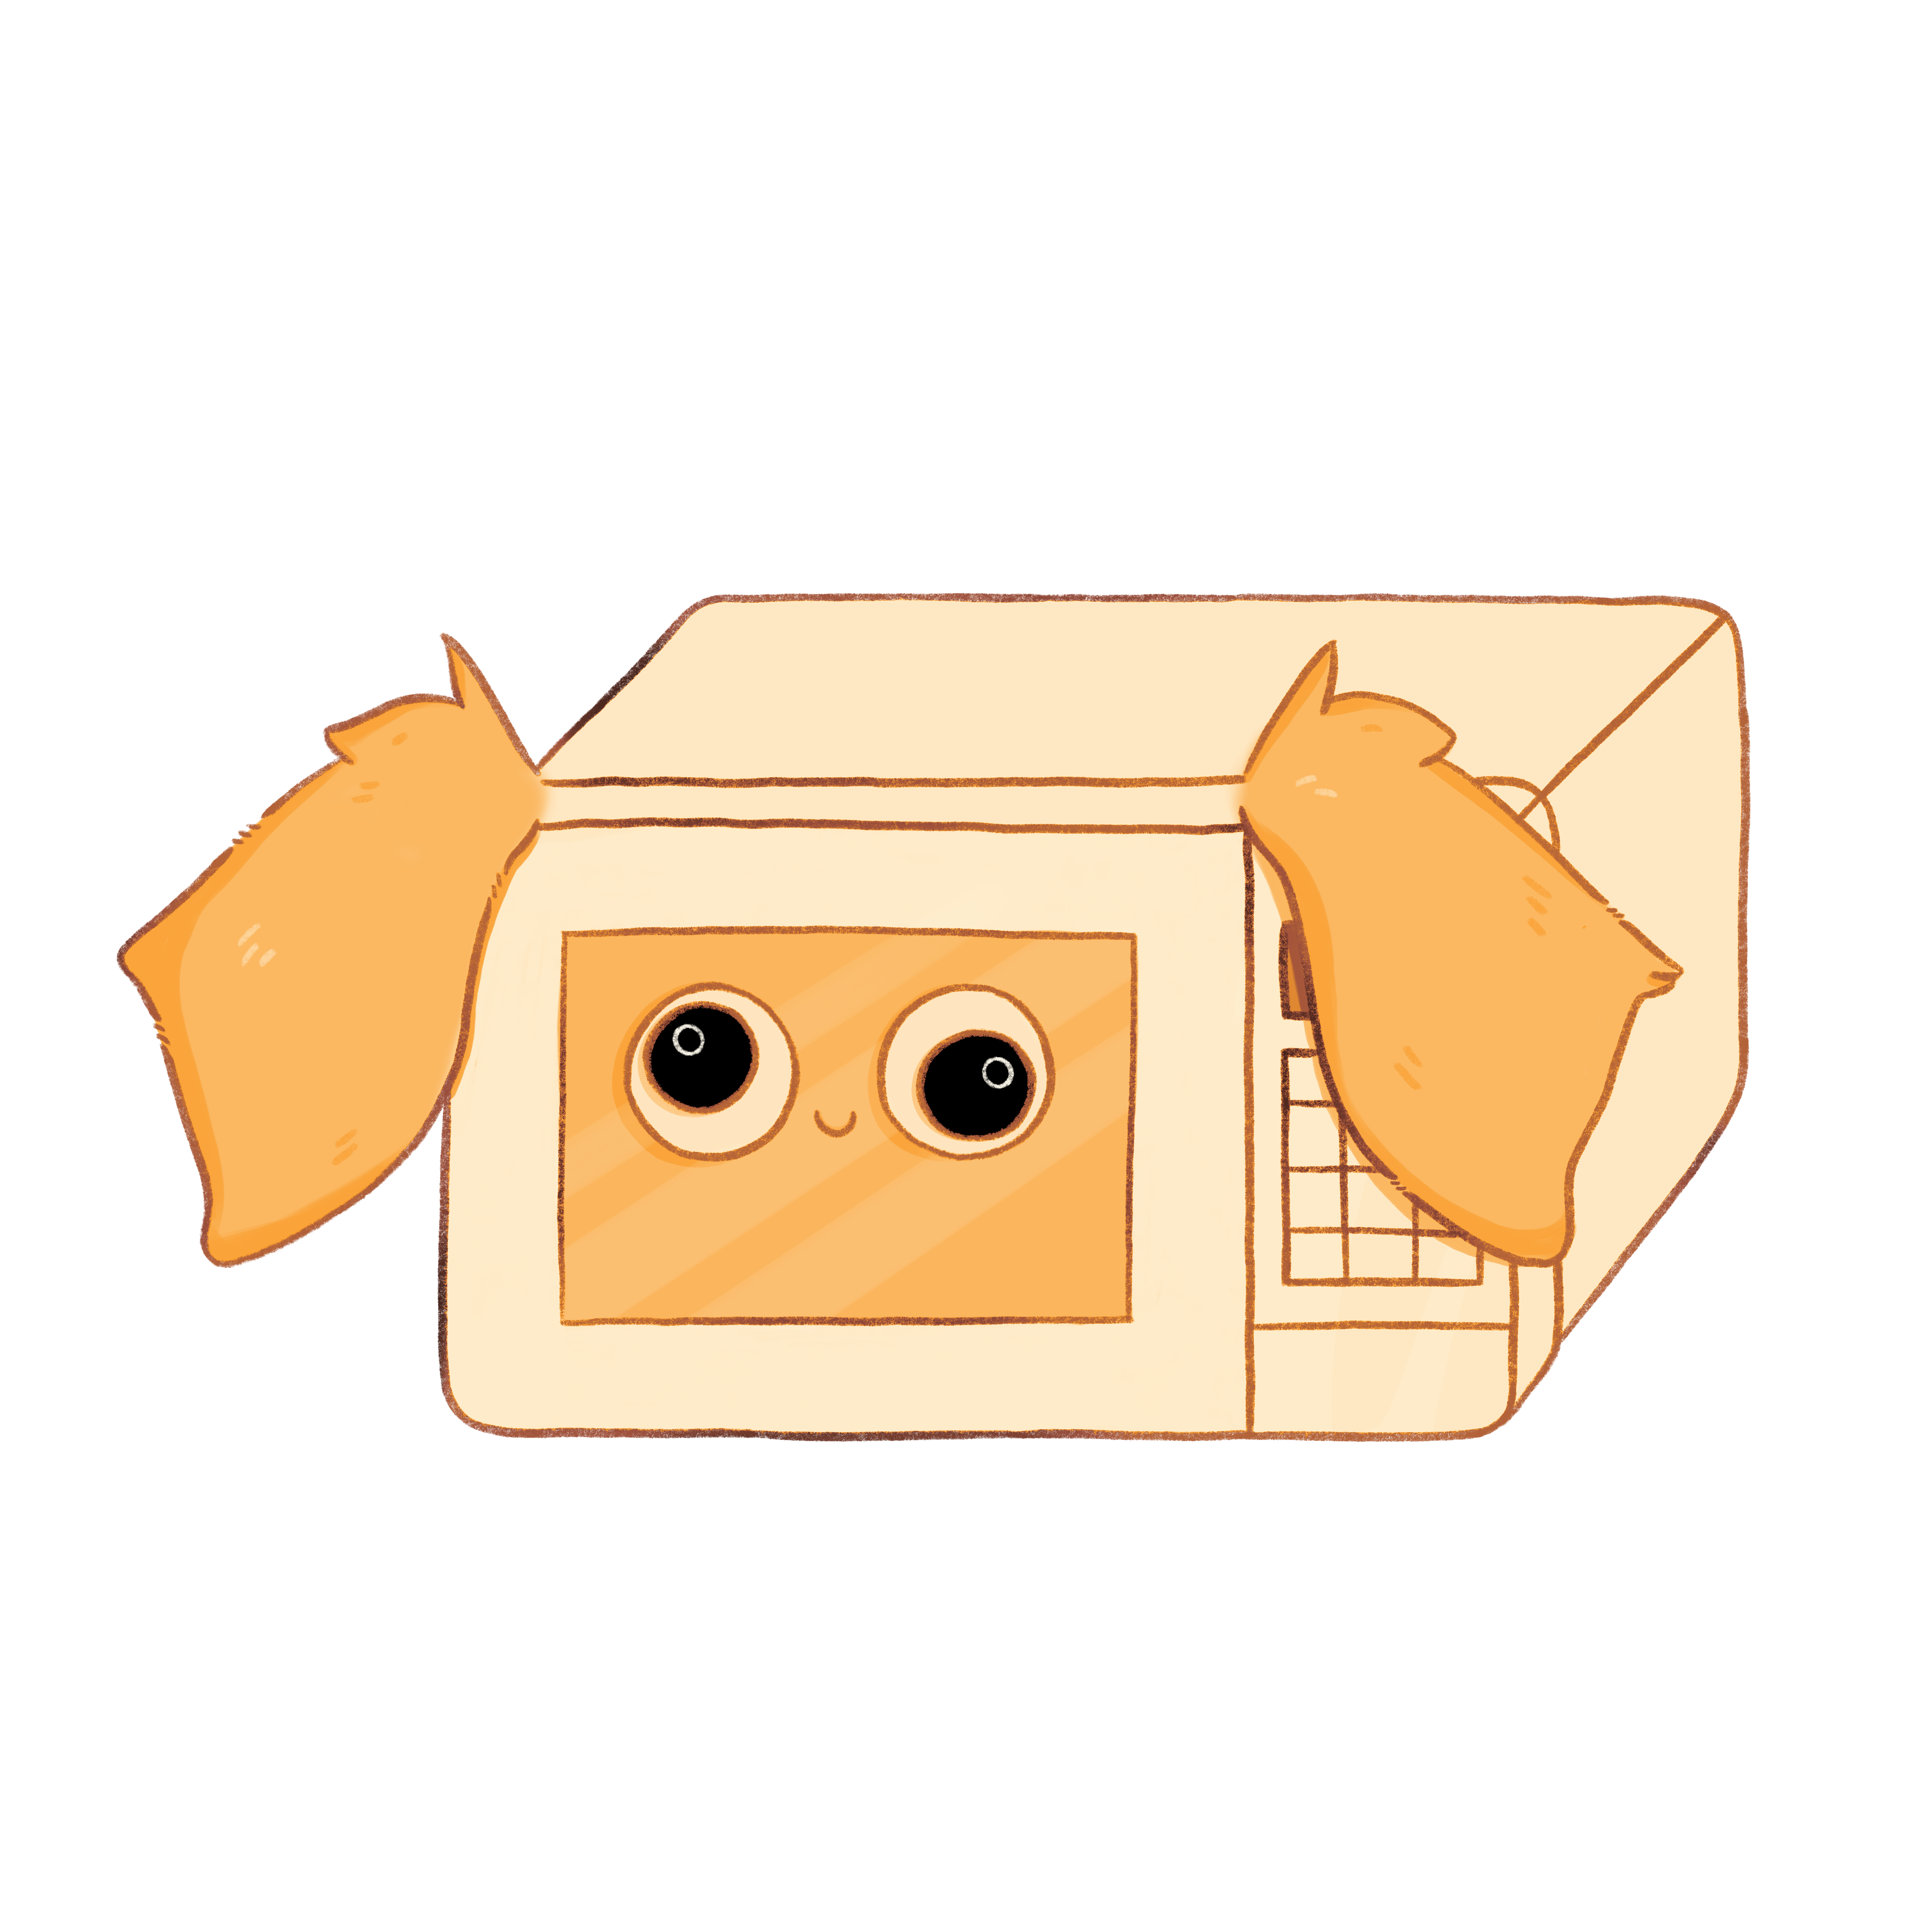 Illustration of a microwave with googly eyes and golden retriever ears